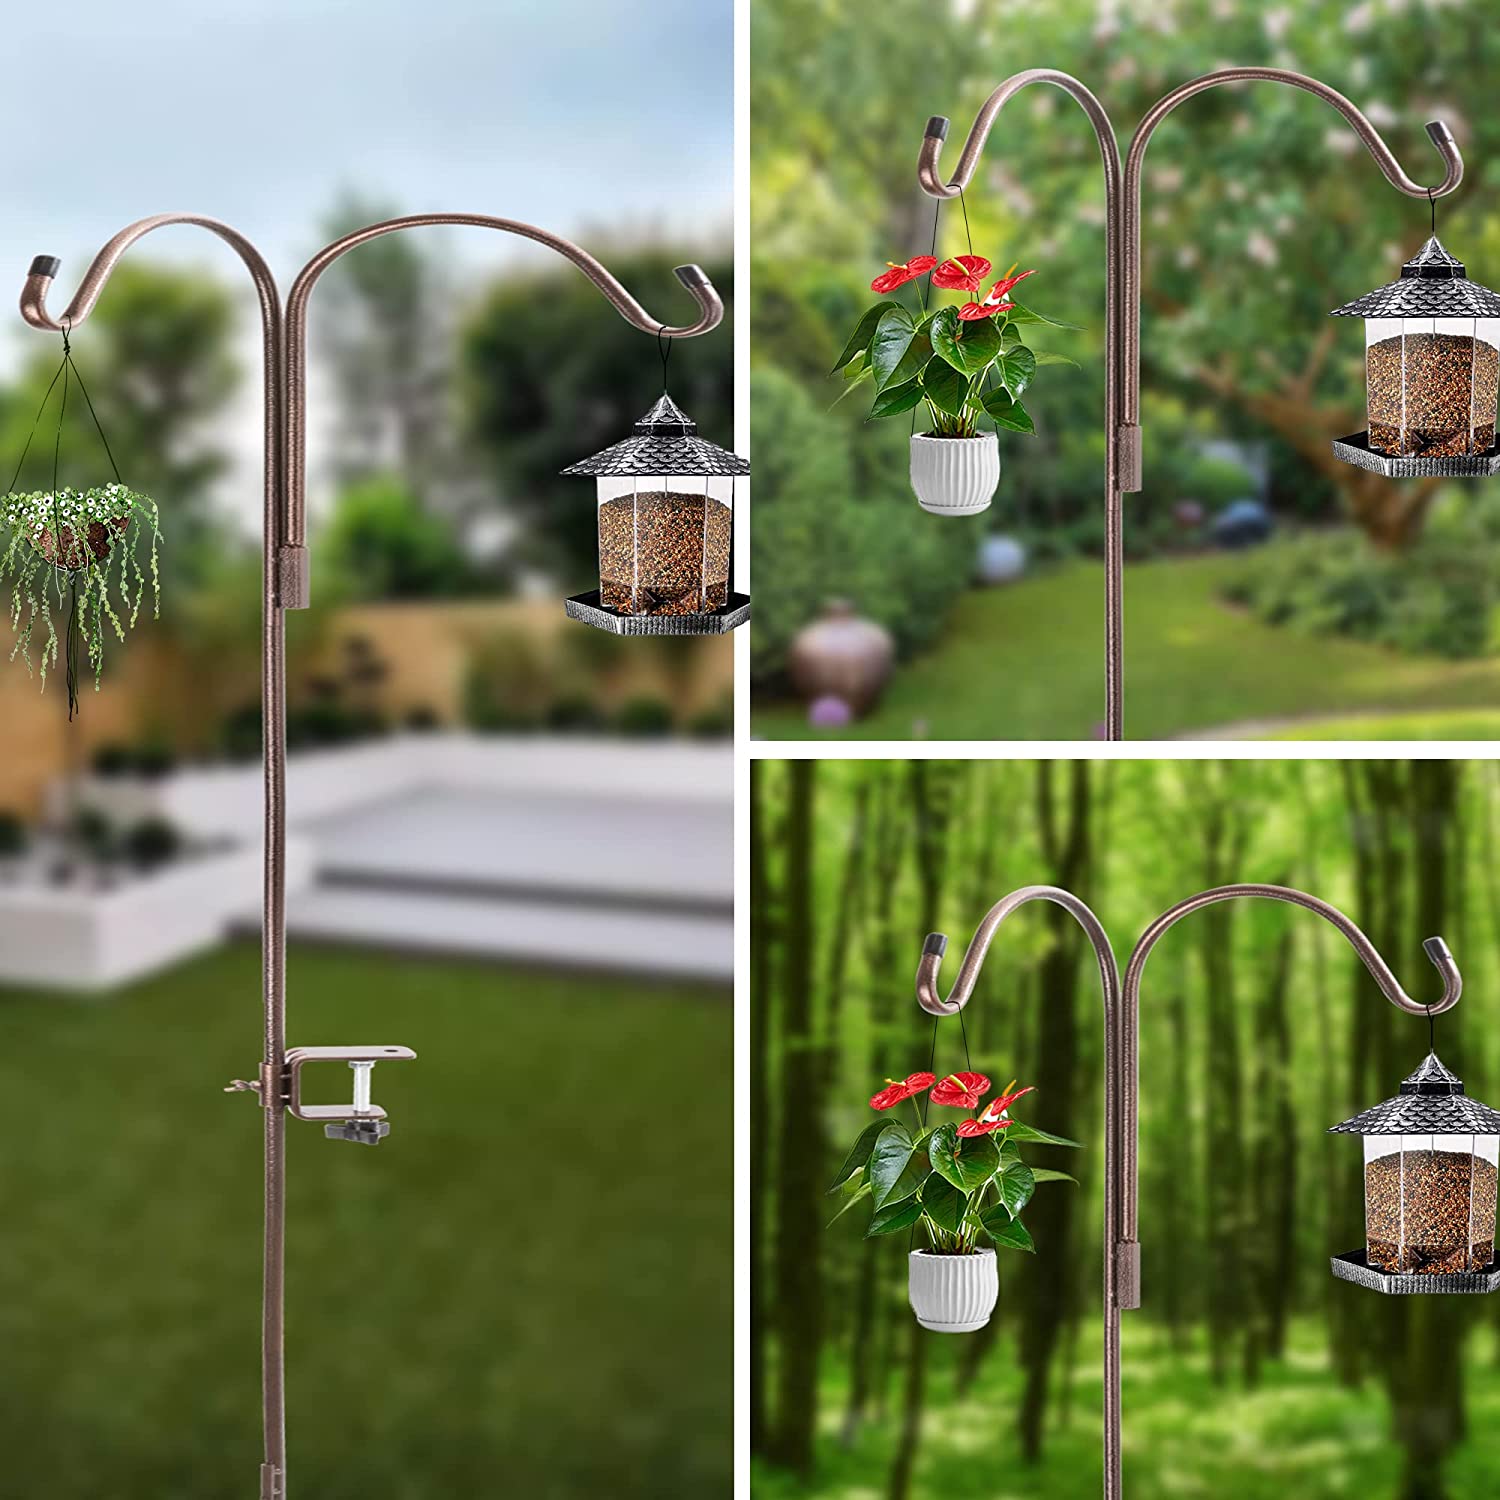 Double Shepherds Hook Adjustable Bird Feeder Pole for Outdoor with 4 Prongs Base,65 Inch Heavy Duty Garden Hanging Plant Hooks Stand Outside for Plant Hanger Wedding Decoration (Pack of 2) - image 5 of 7